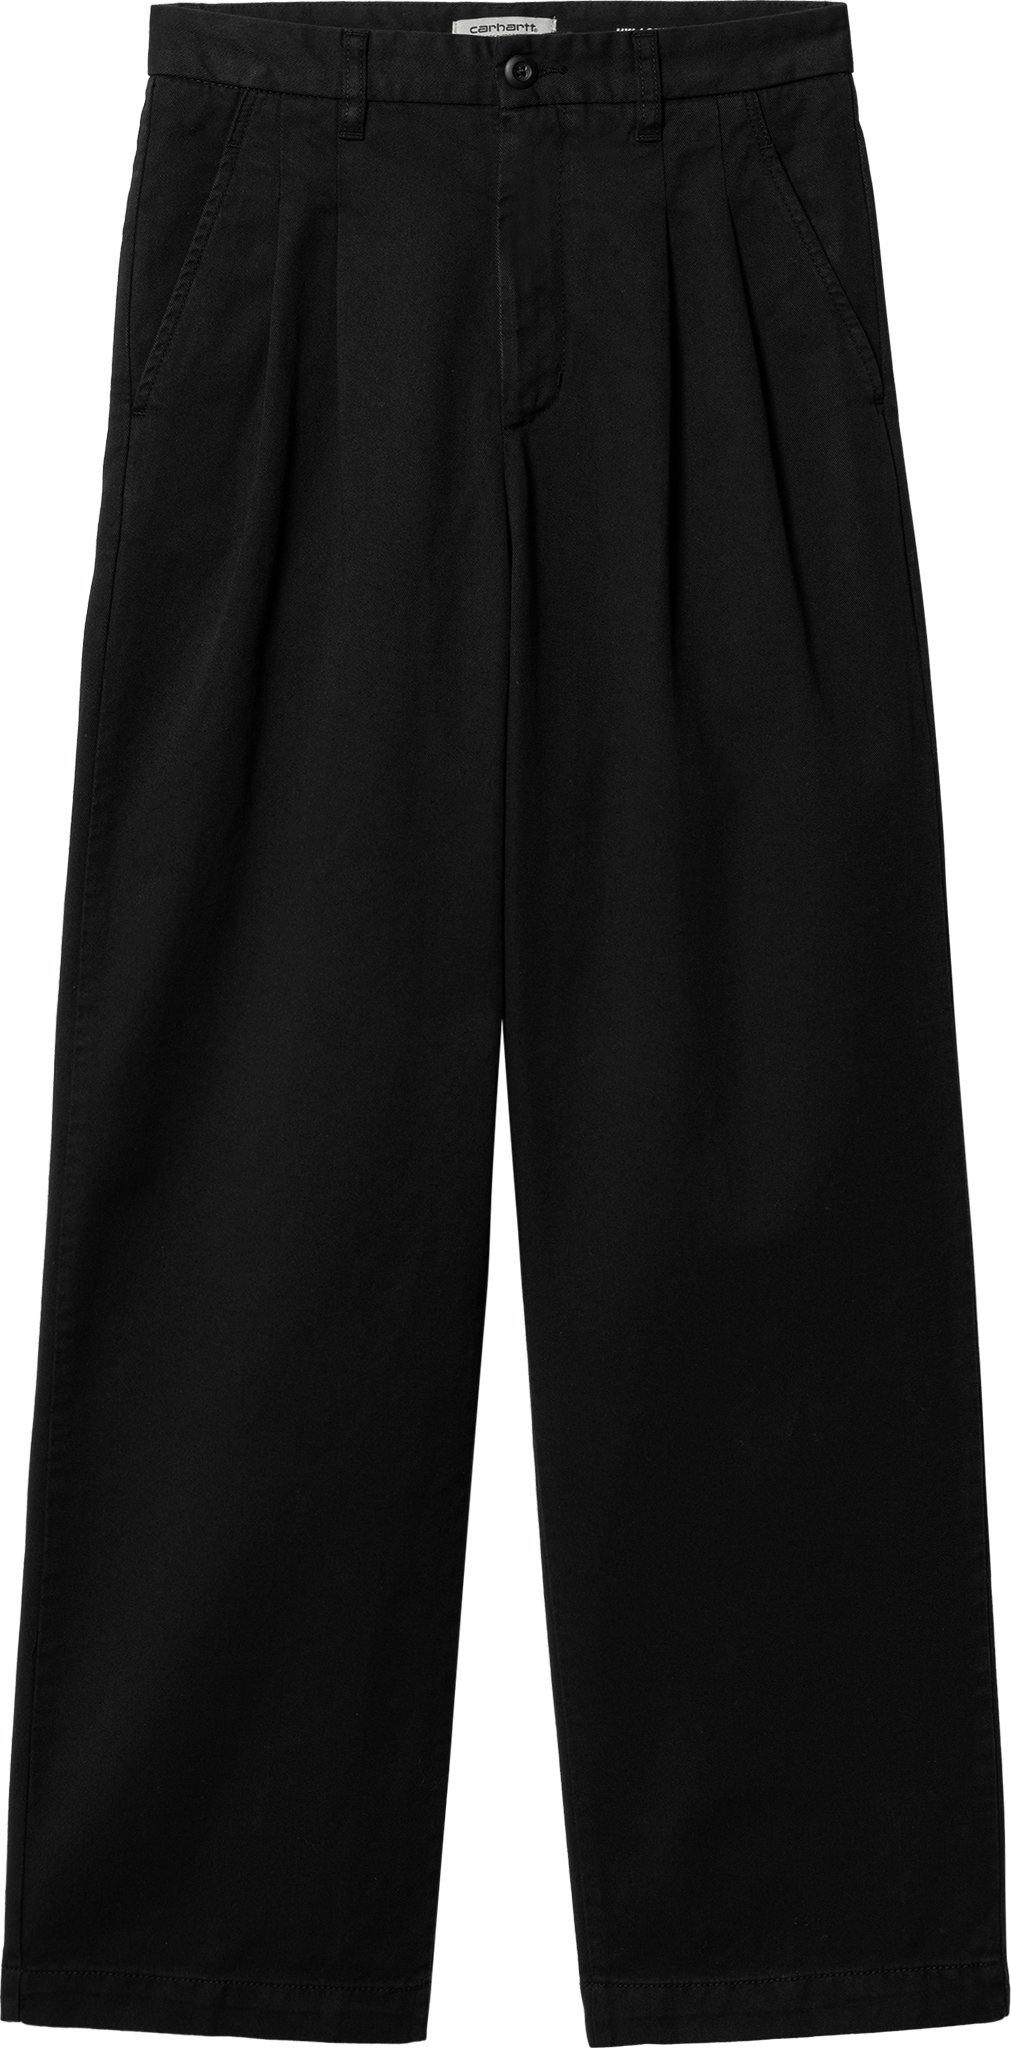 Product image for Cara Pant - Women's